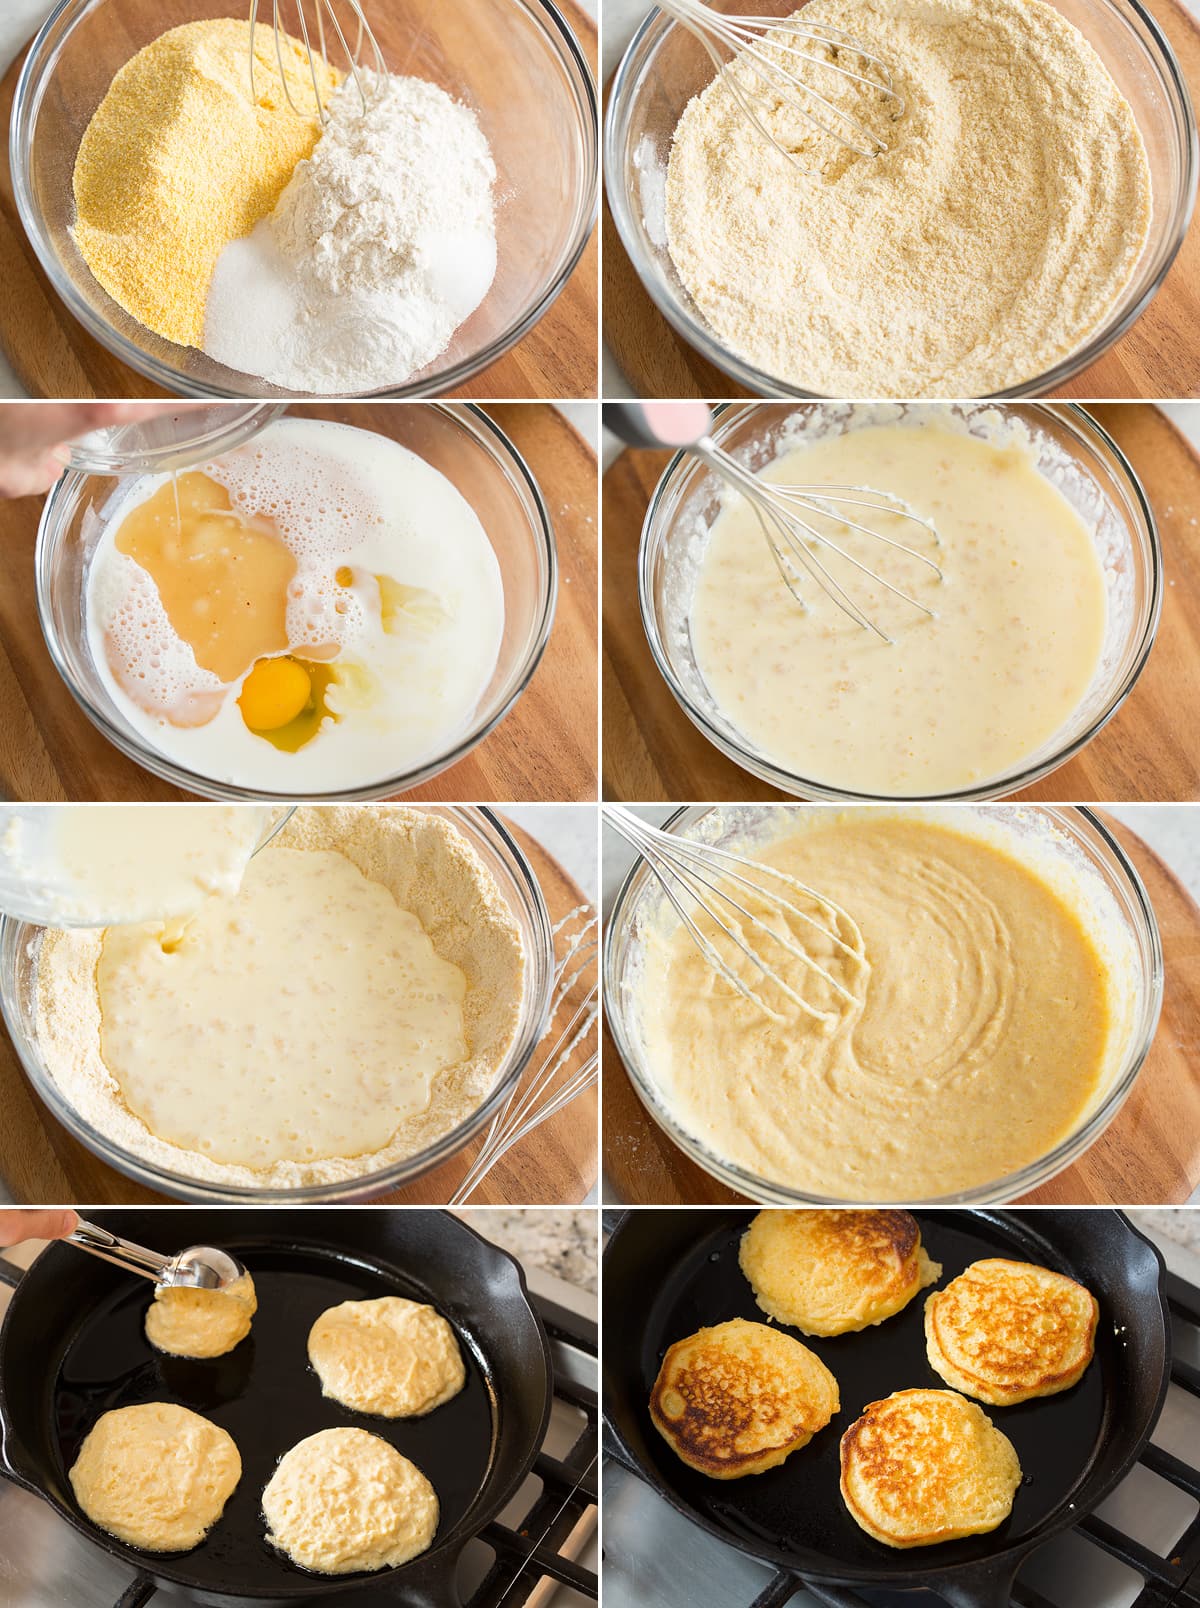 Group of images showing all the steps of making johnny cakes batter and cooking in cast iron pan.